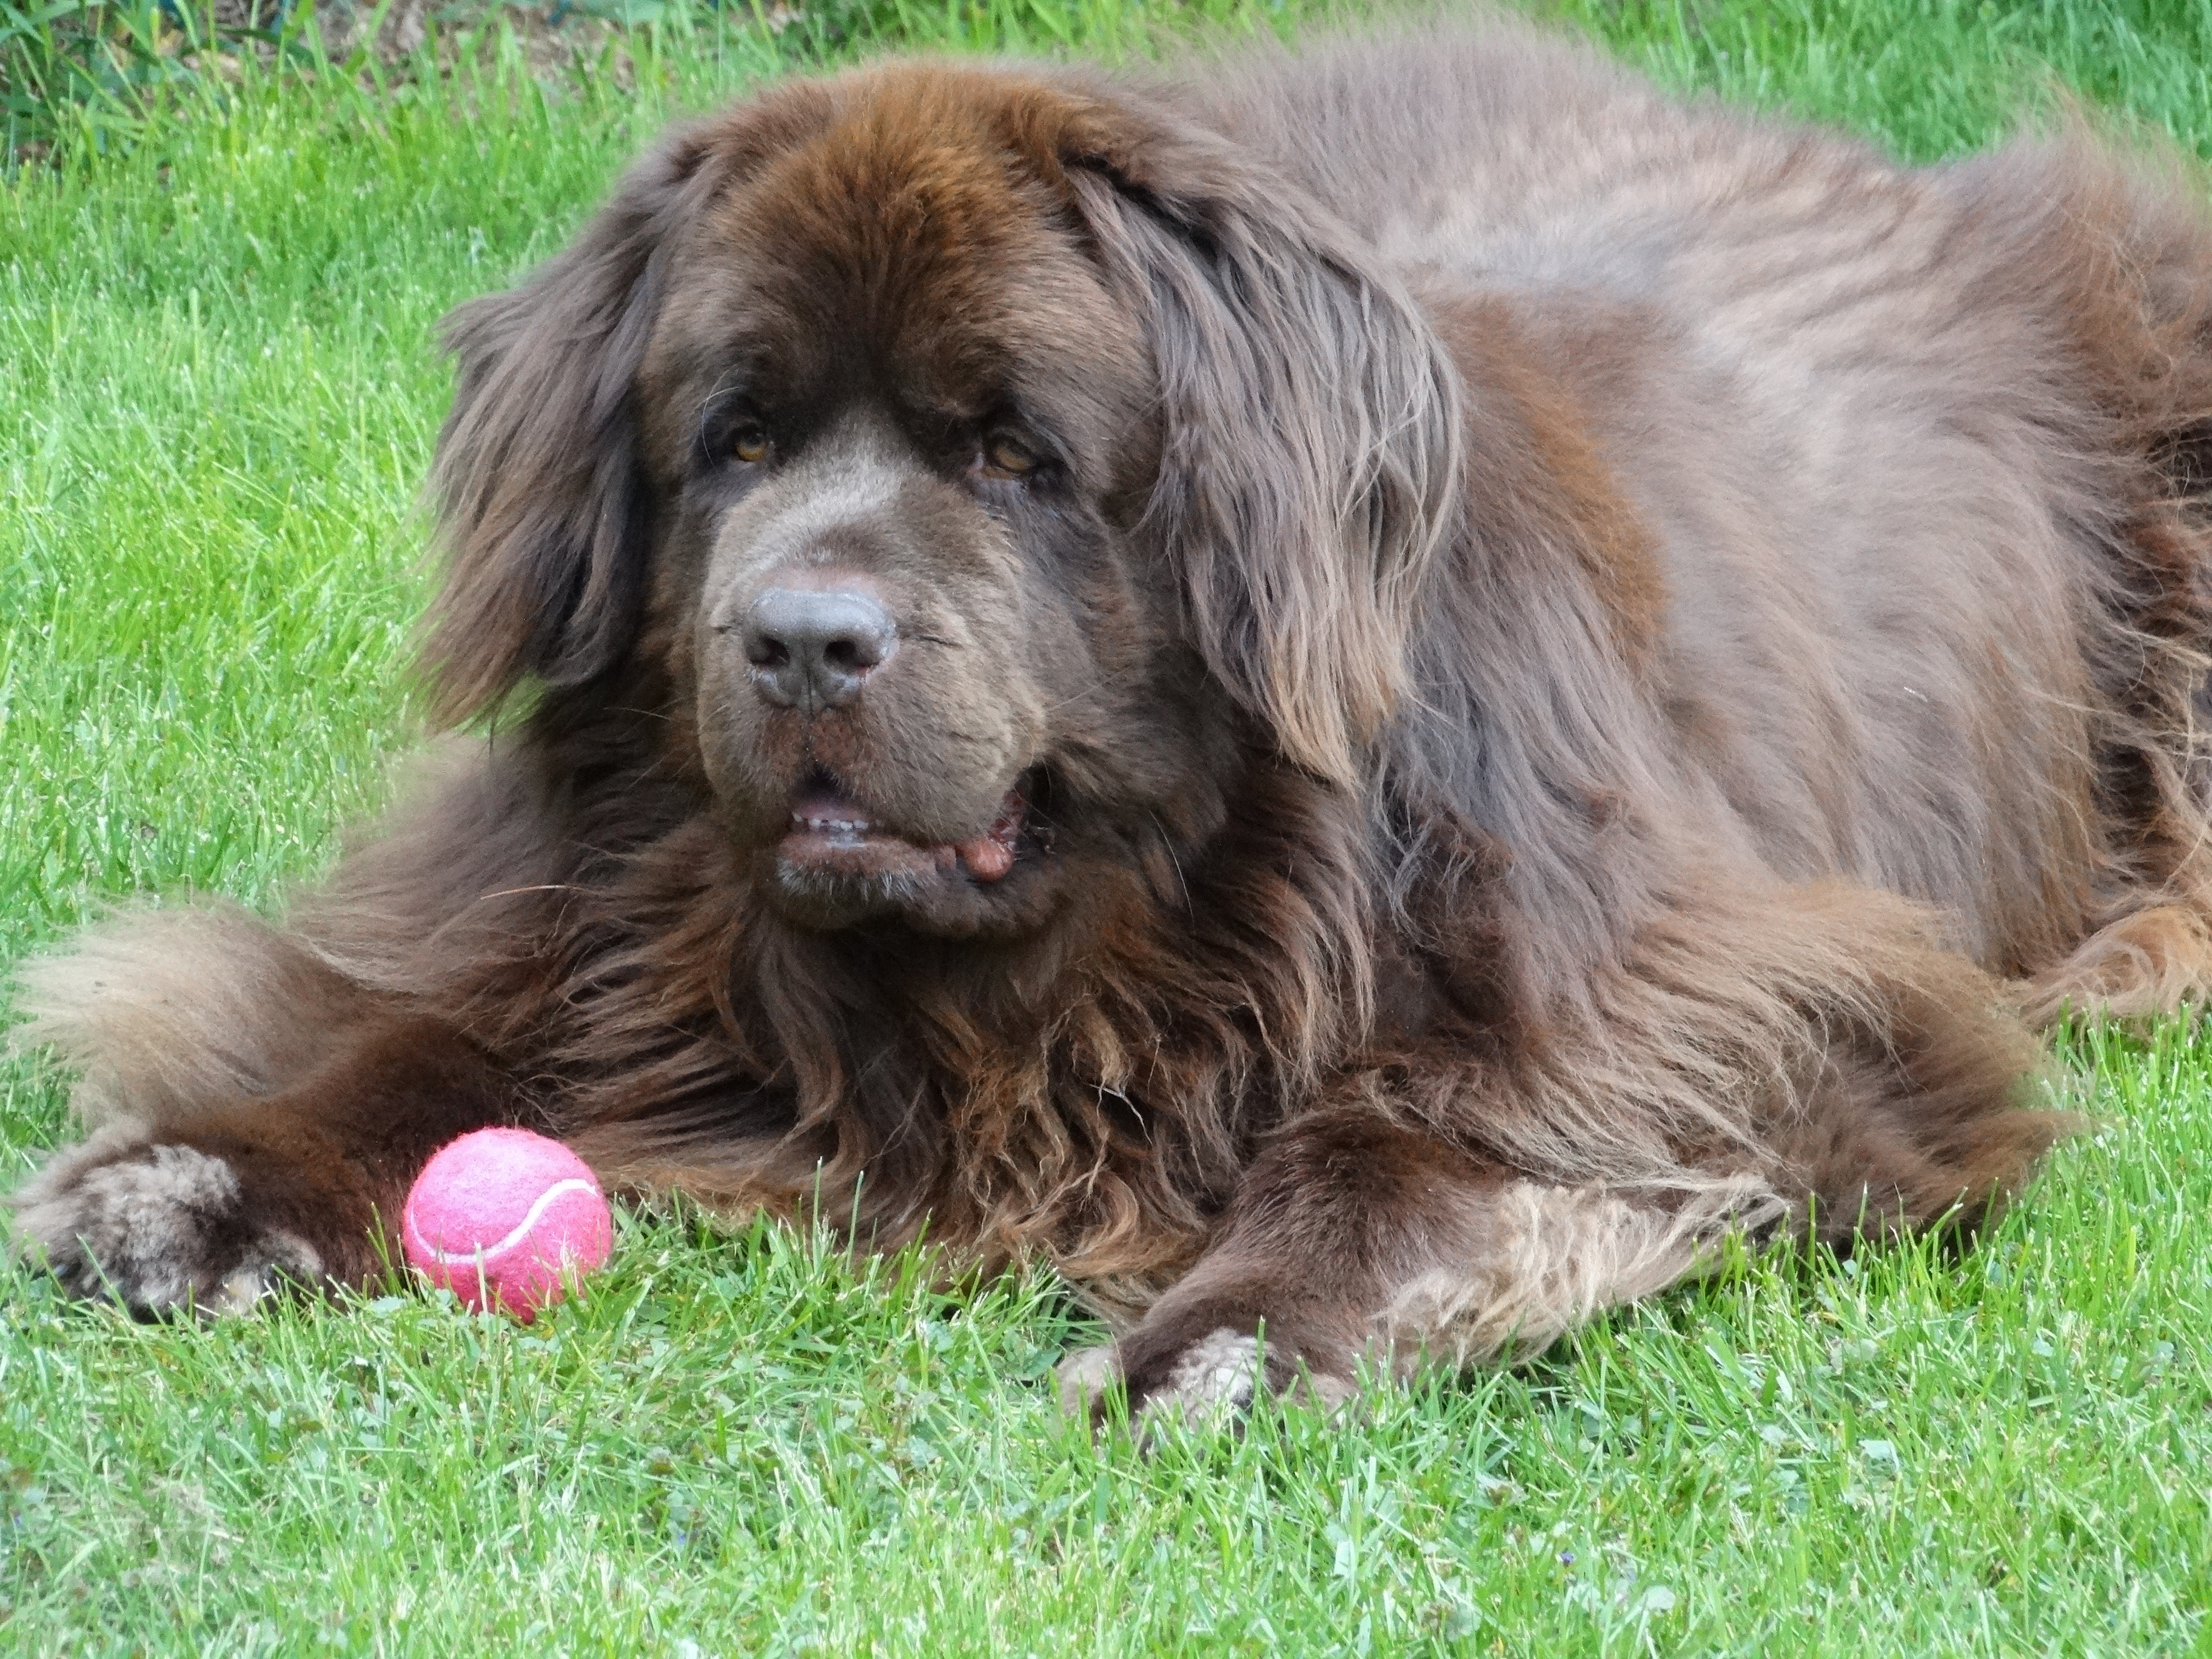 Large brown dog lies on grass with a pink ball